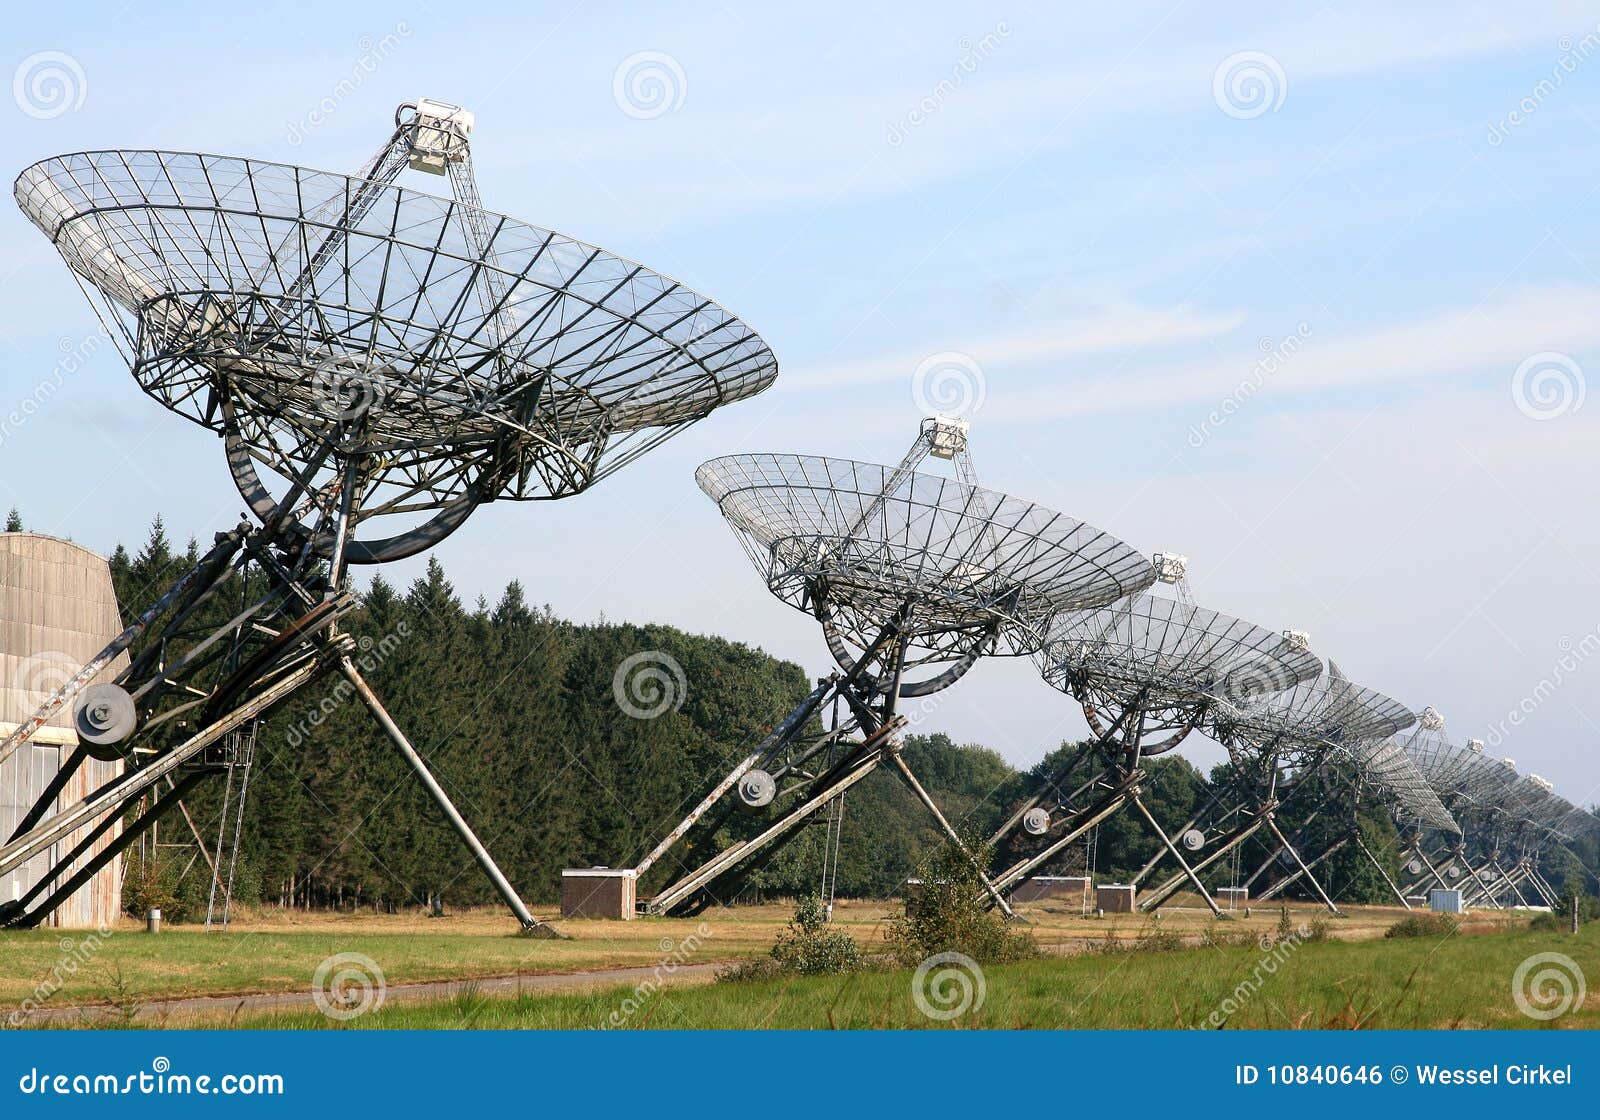 an array of radio telescopes in the netherlands